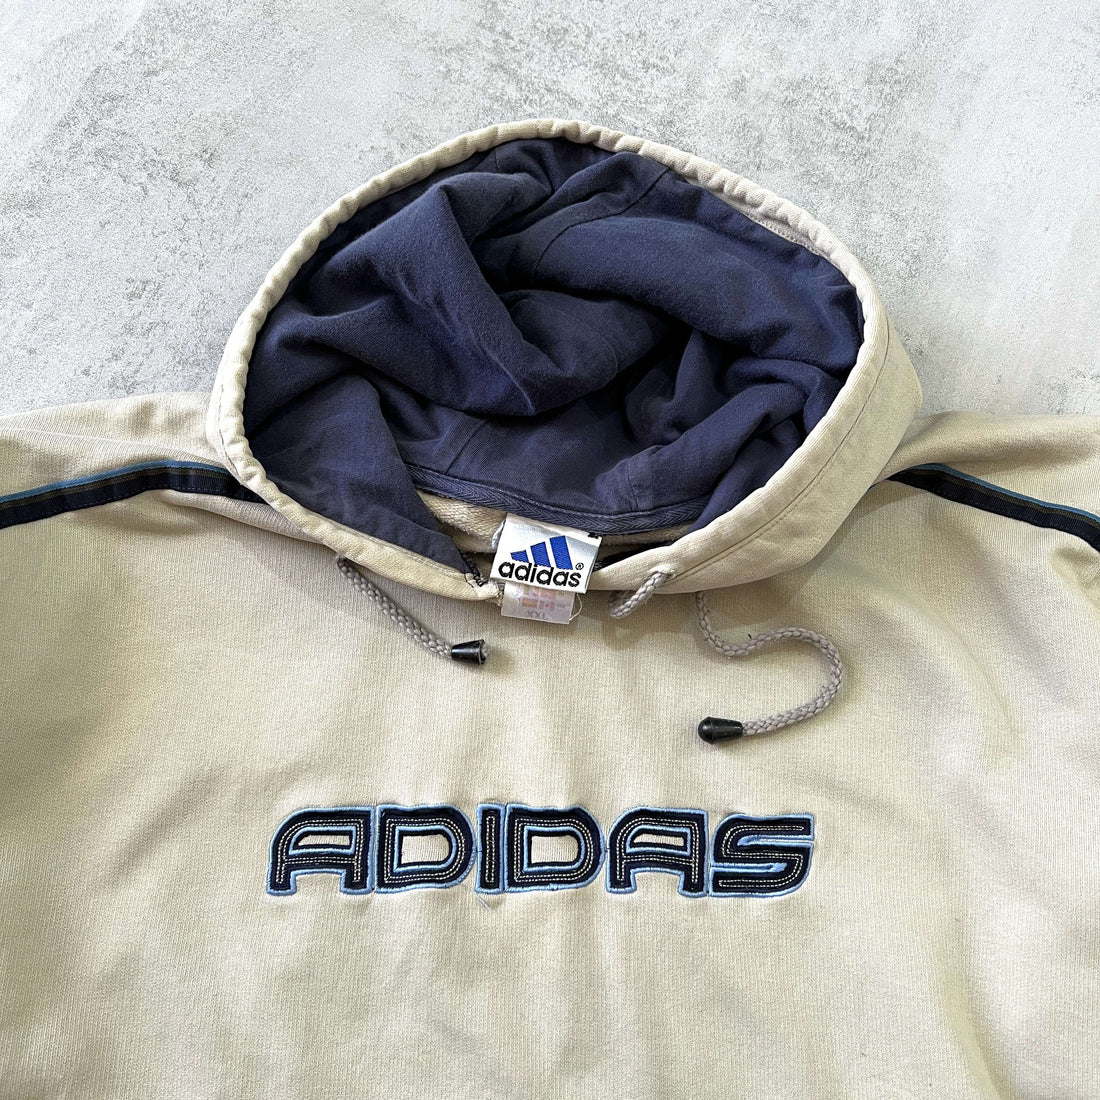 Adidas 1990s embroidered hoodie (XXL)